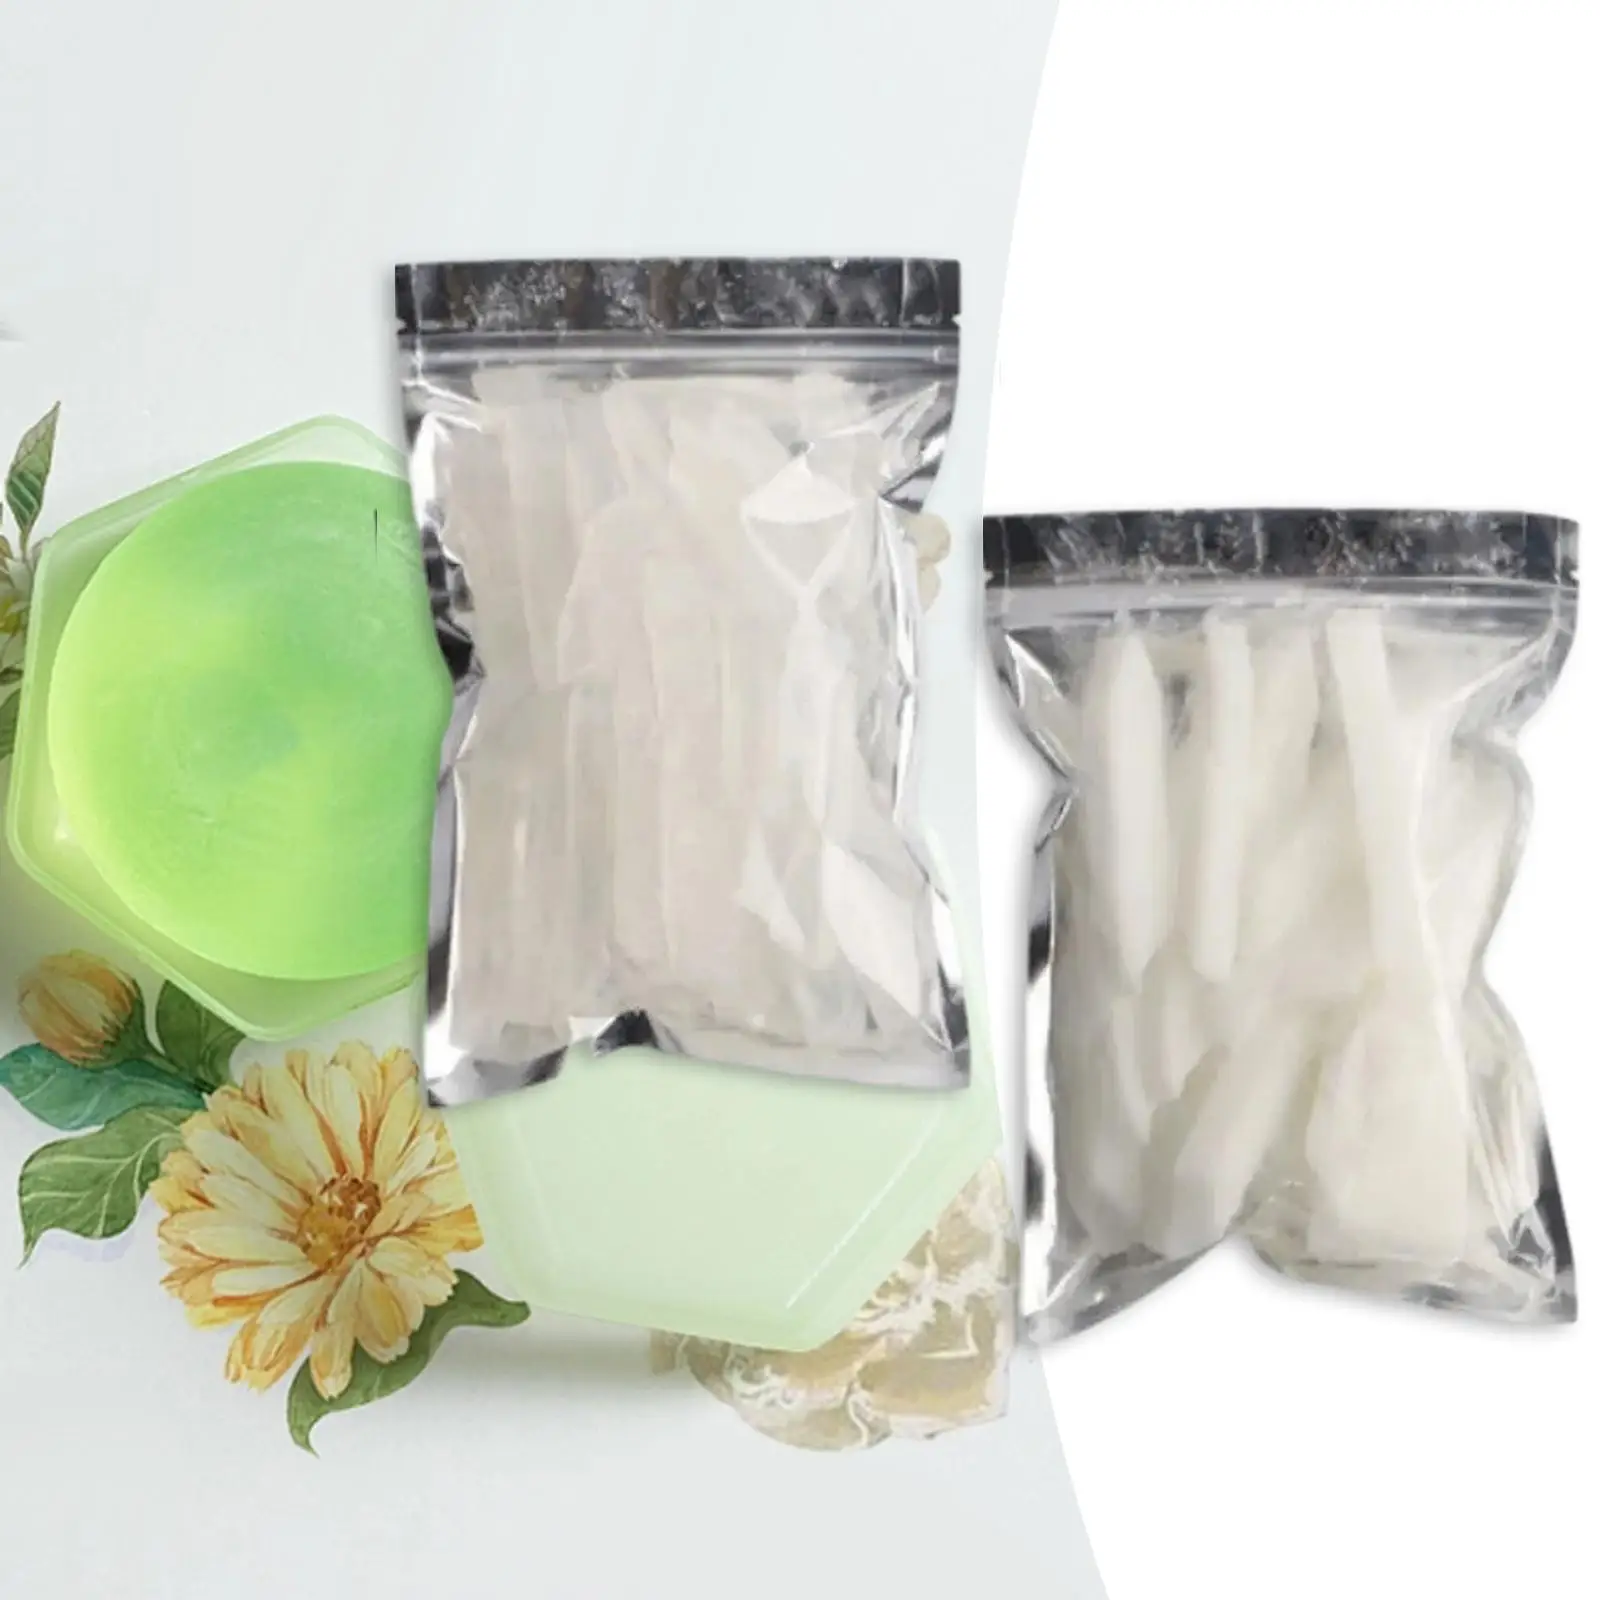 Soap Base Clear and White Melt and Pour Homemade Coconut Oil Palm Oil Glycerin Easy to Make Soap Crafting Unisex Kids Adults